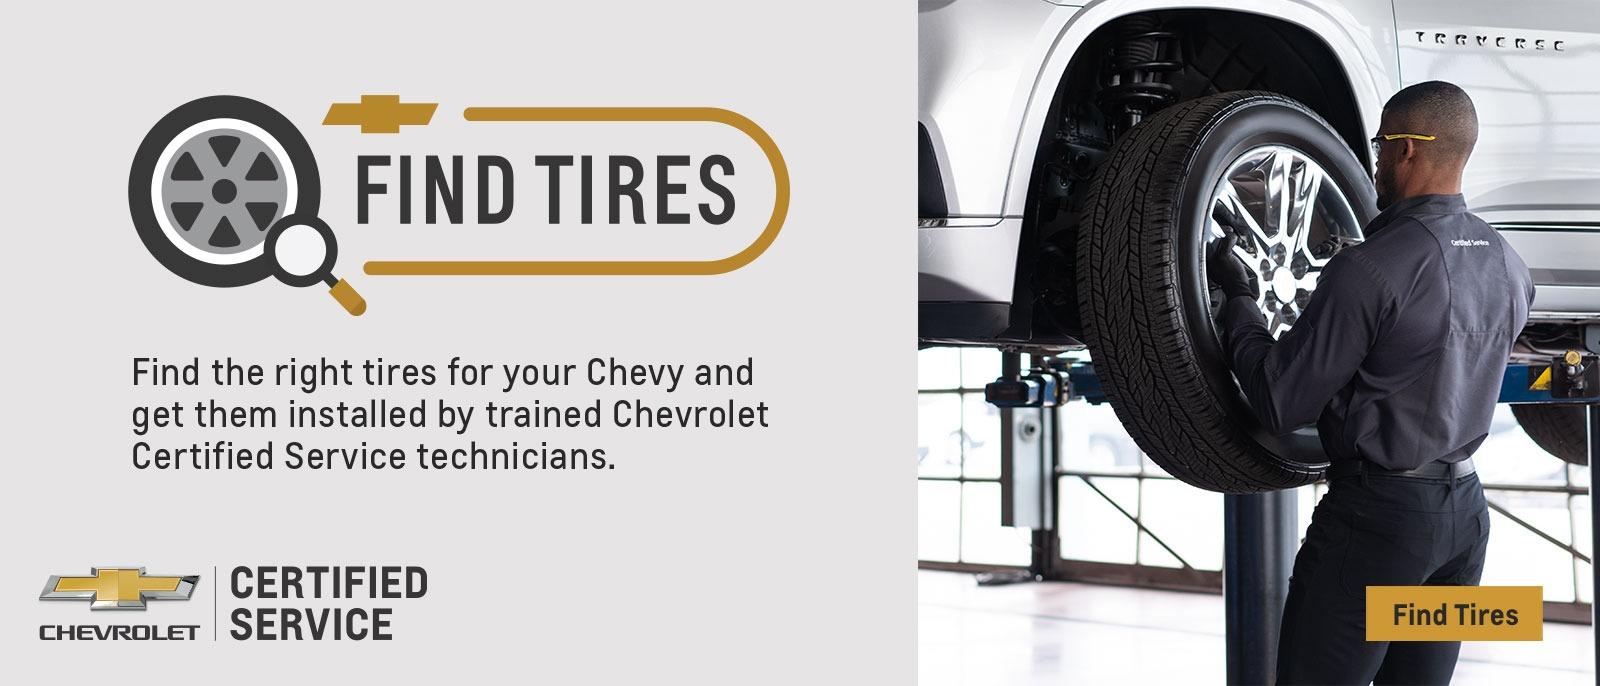 Find the right tires for your Chevy and get them installed by trained Chevrolet Certified Service technicians.